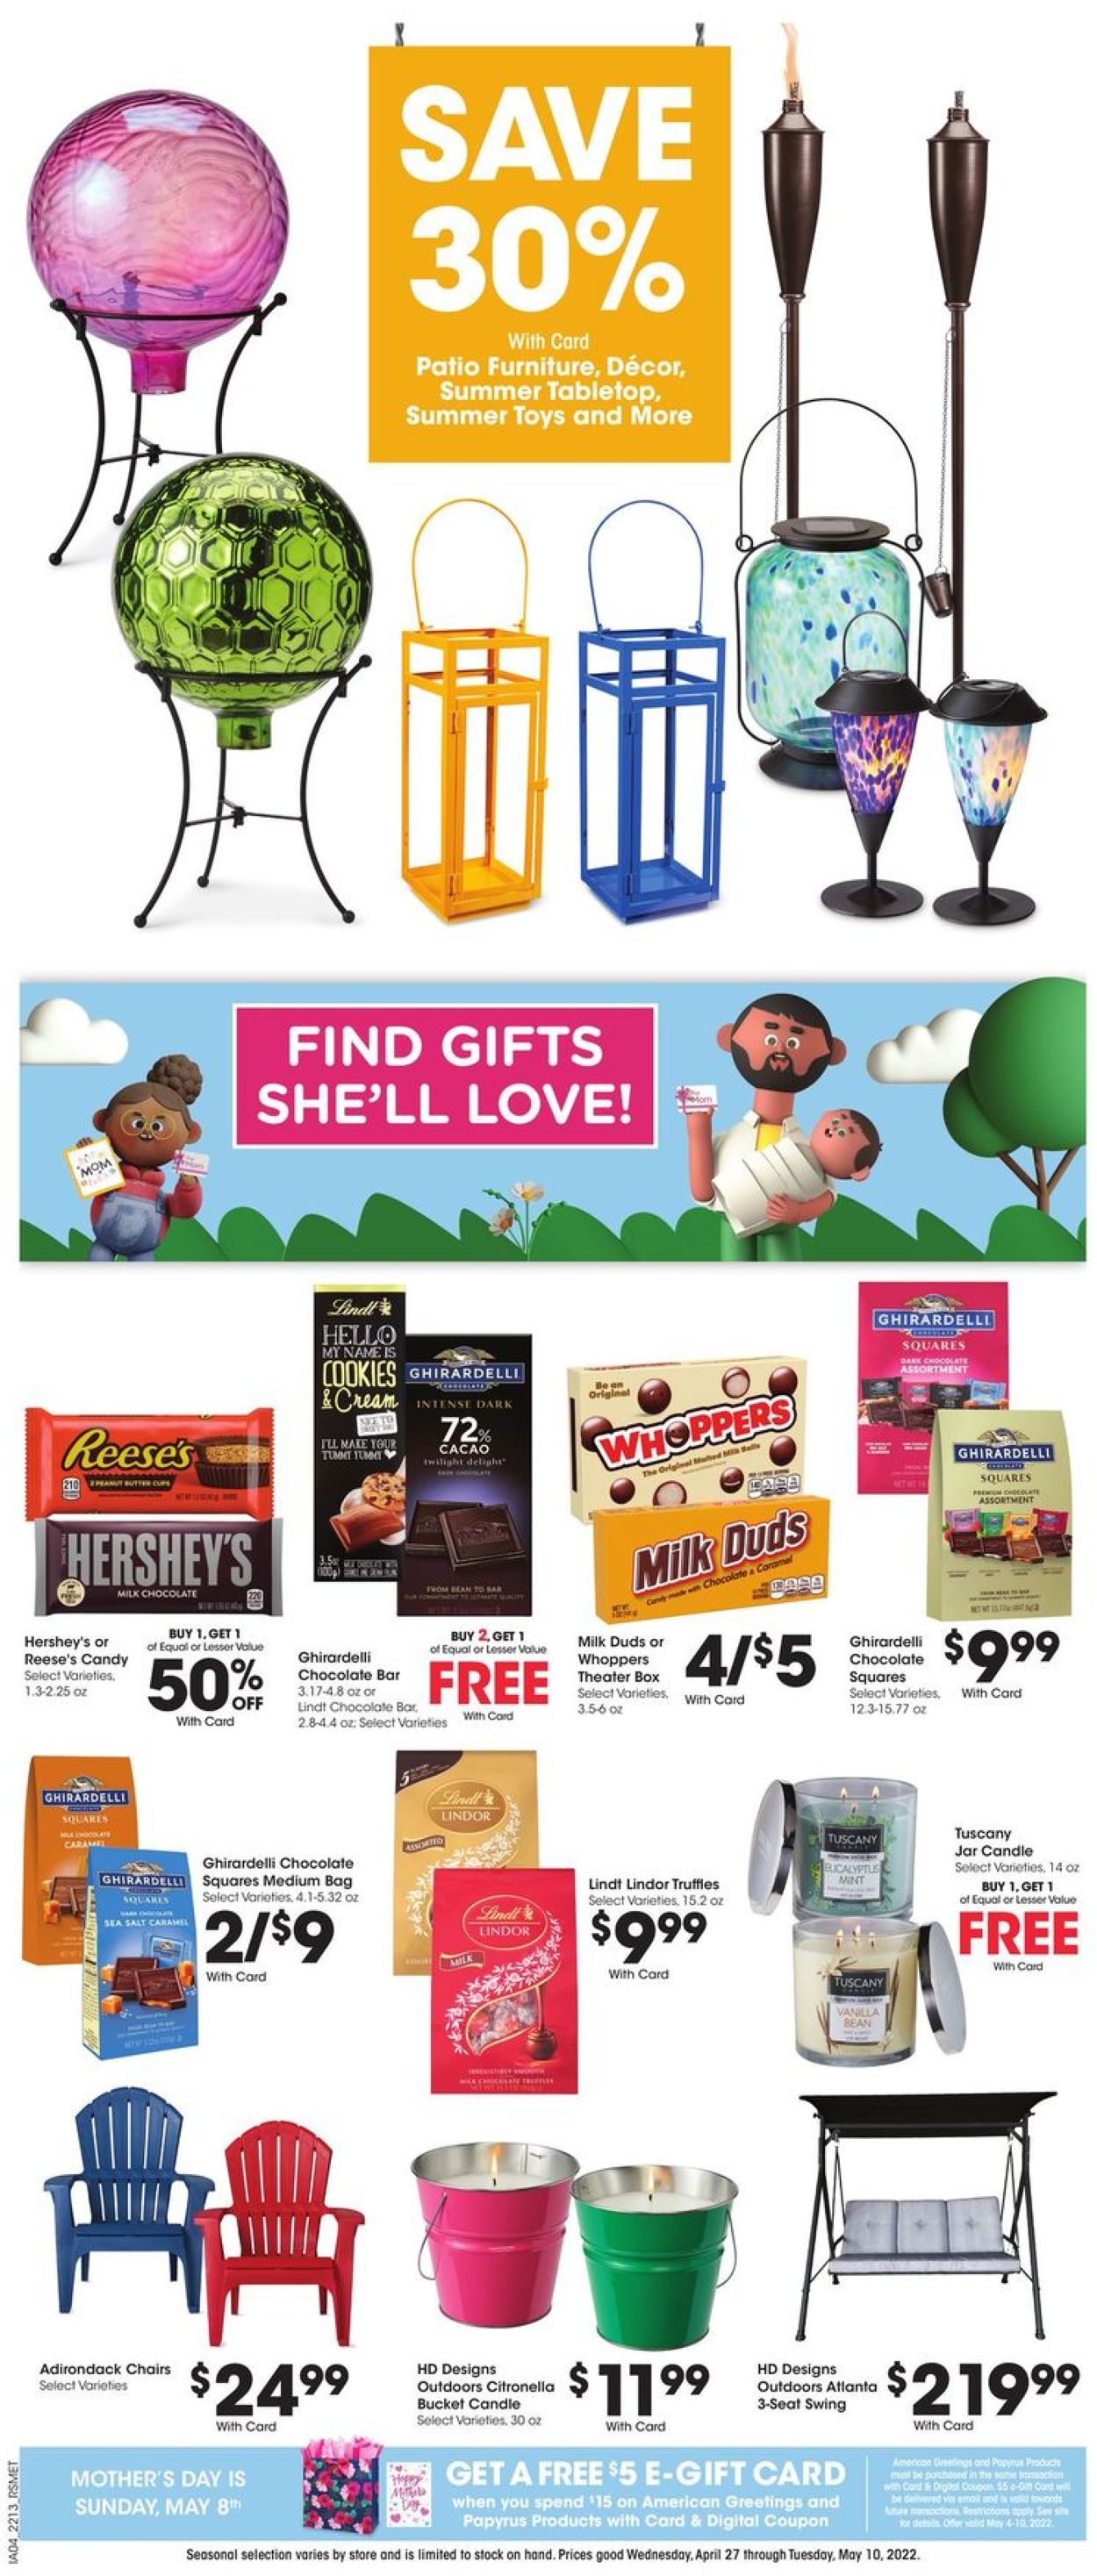 Pick ‘n Save Ad from 05/04/2022